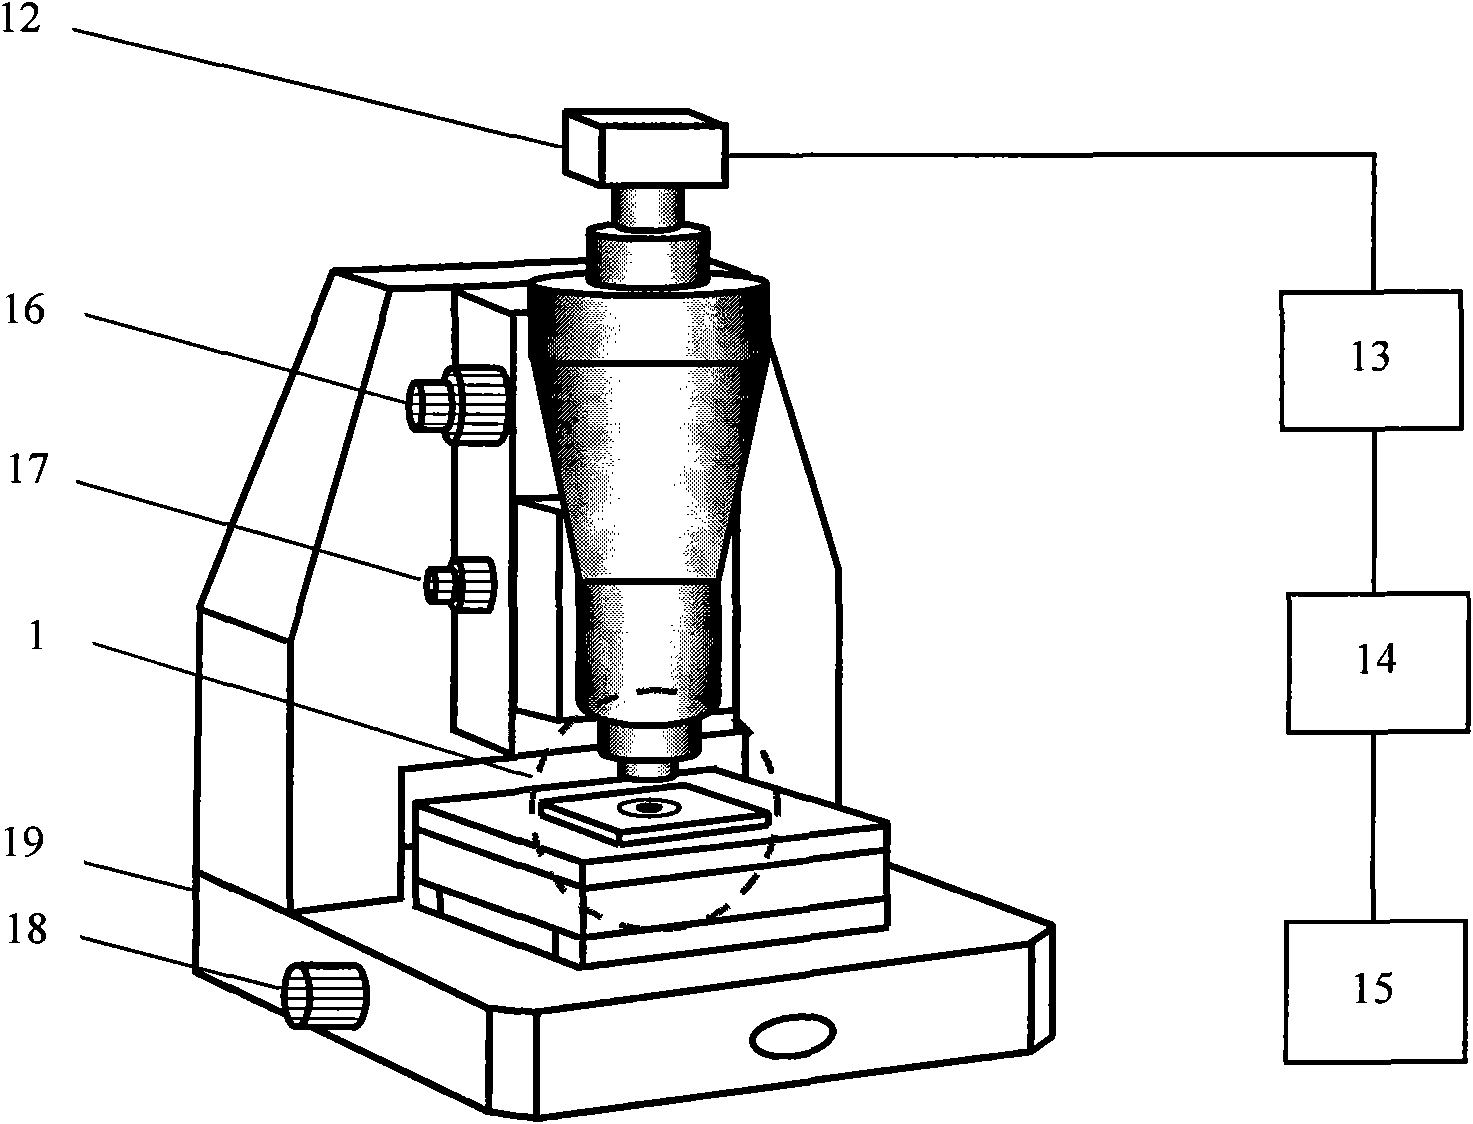 Ultra-high resolution optical microscope imaging method and device